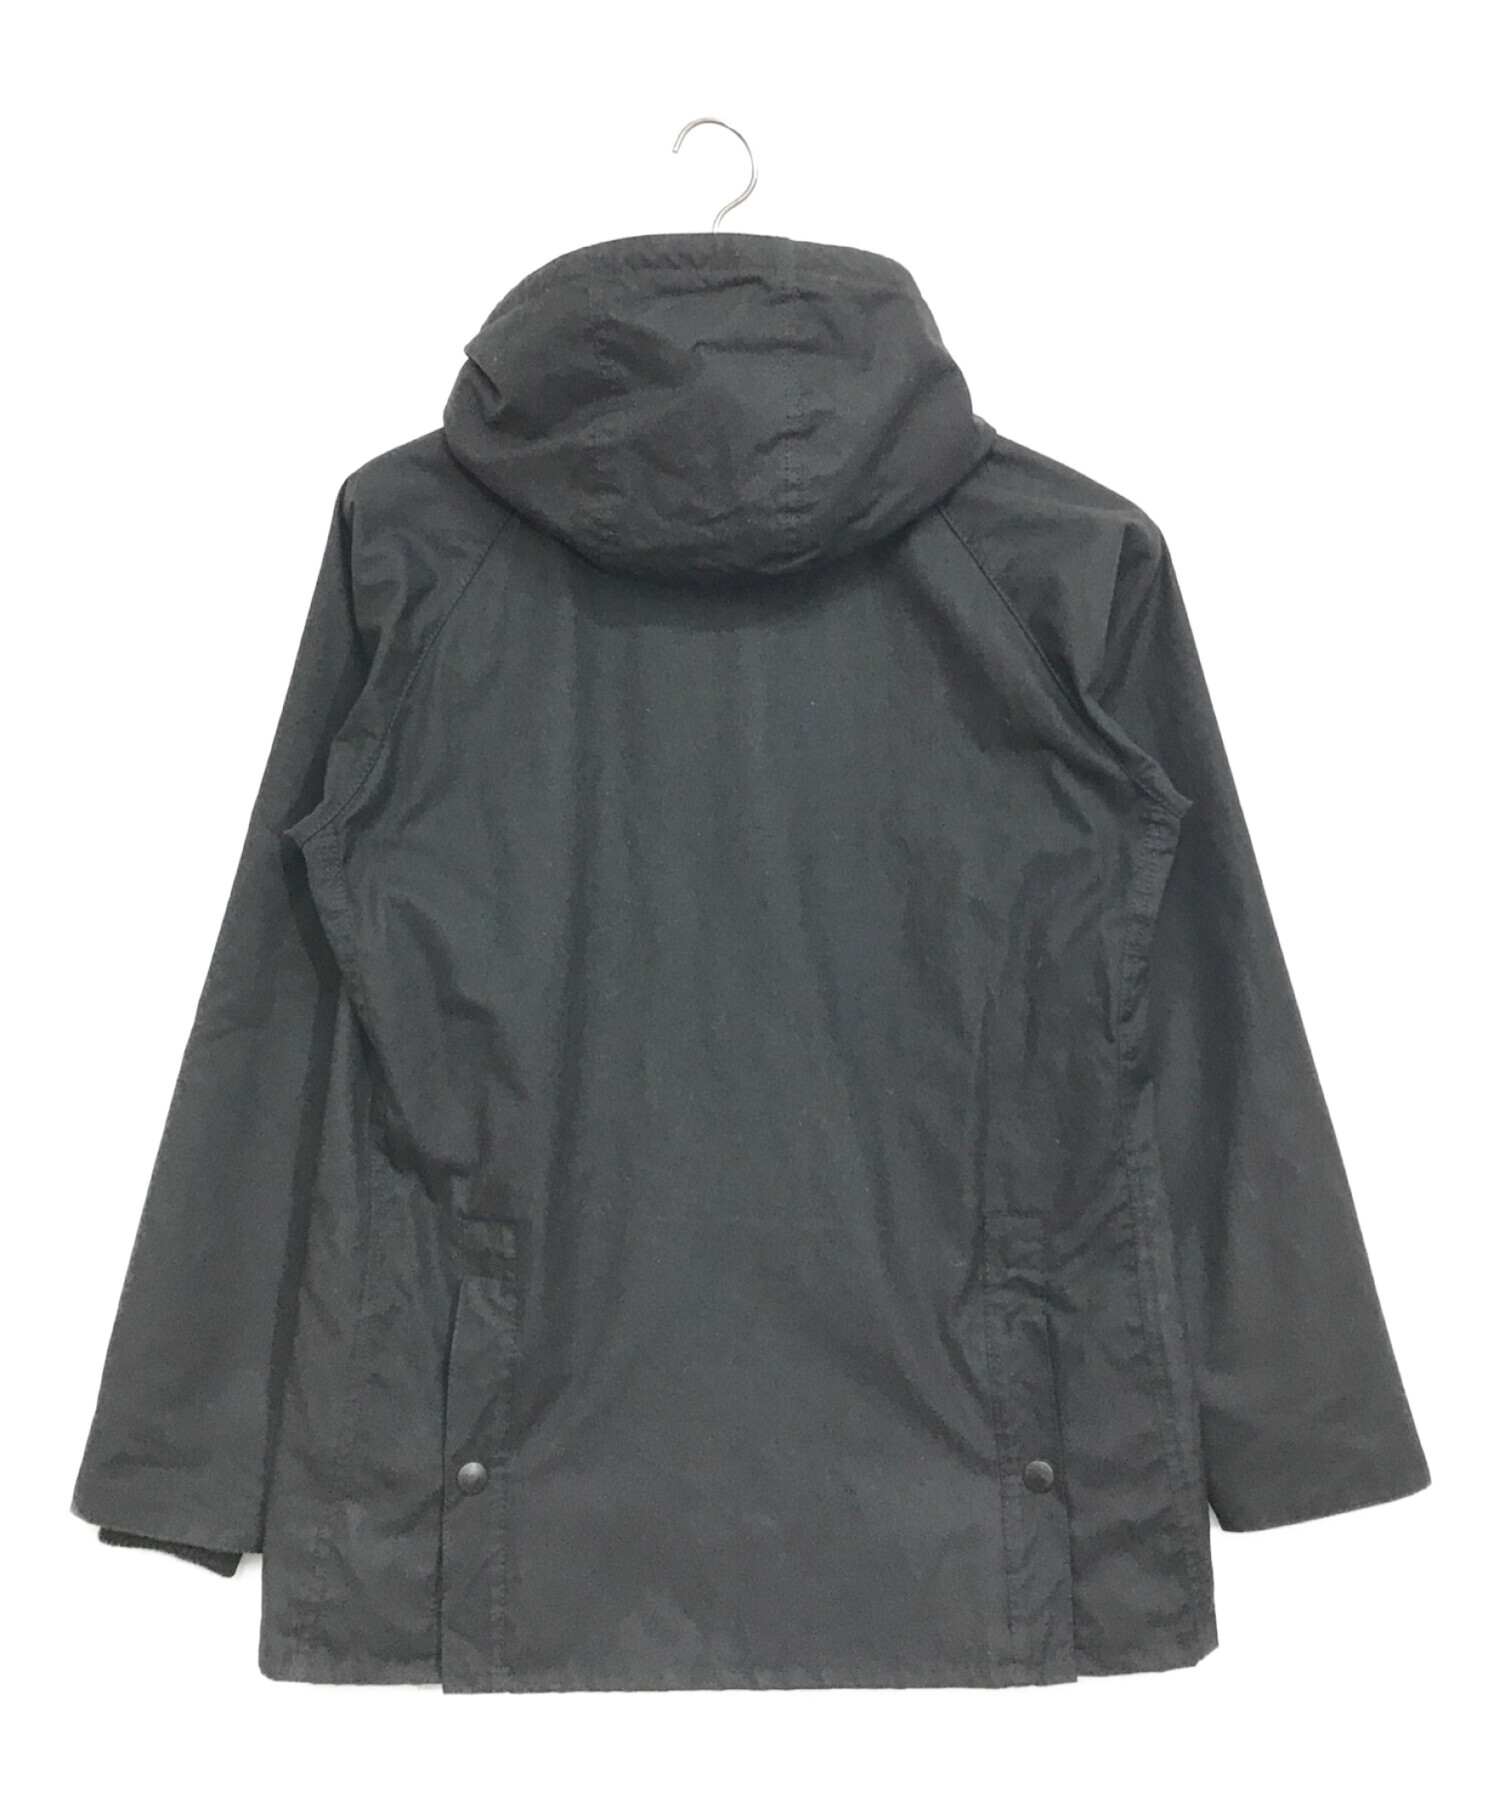 Barbour (バブアー) HOODED BEDALE SL ブラック サイズ:38